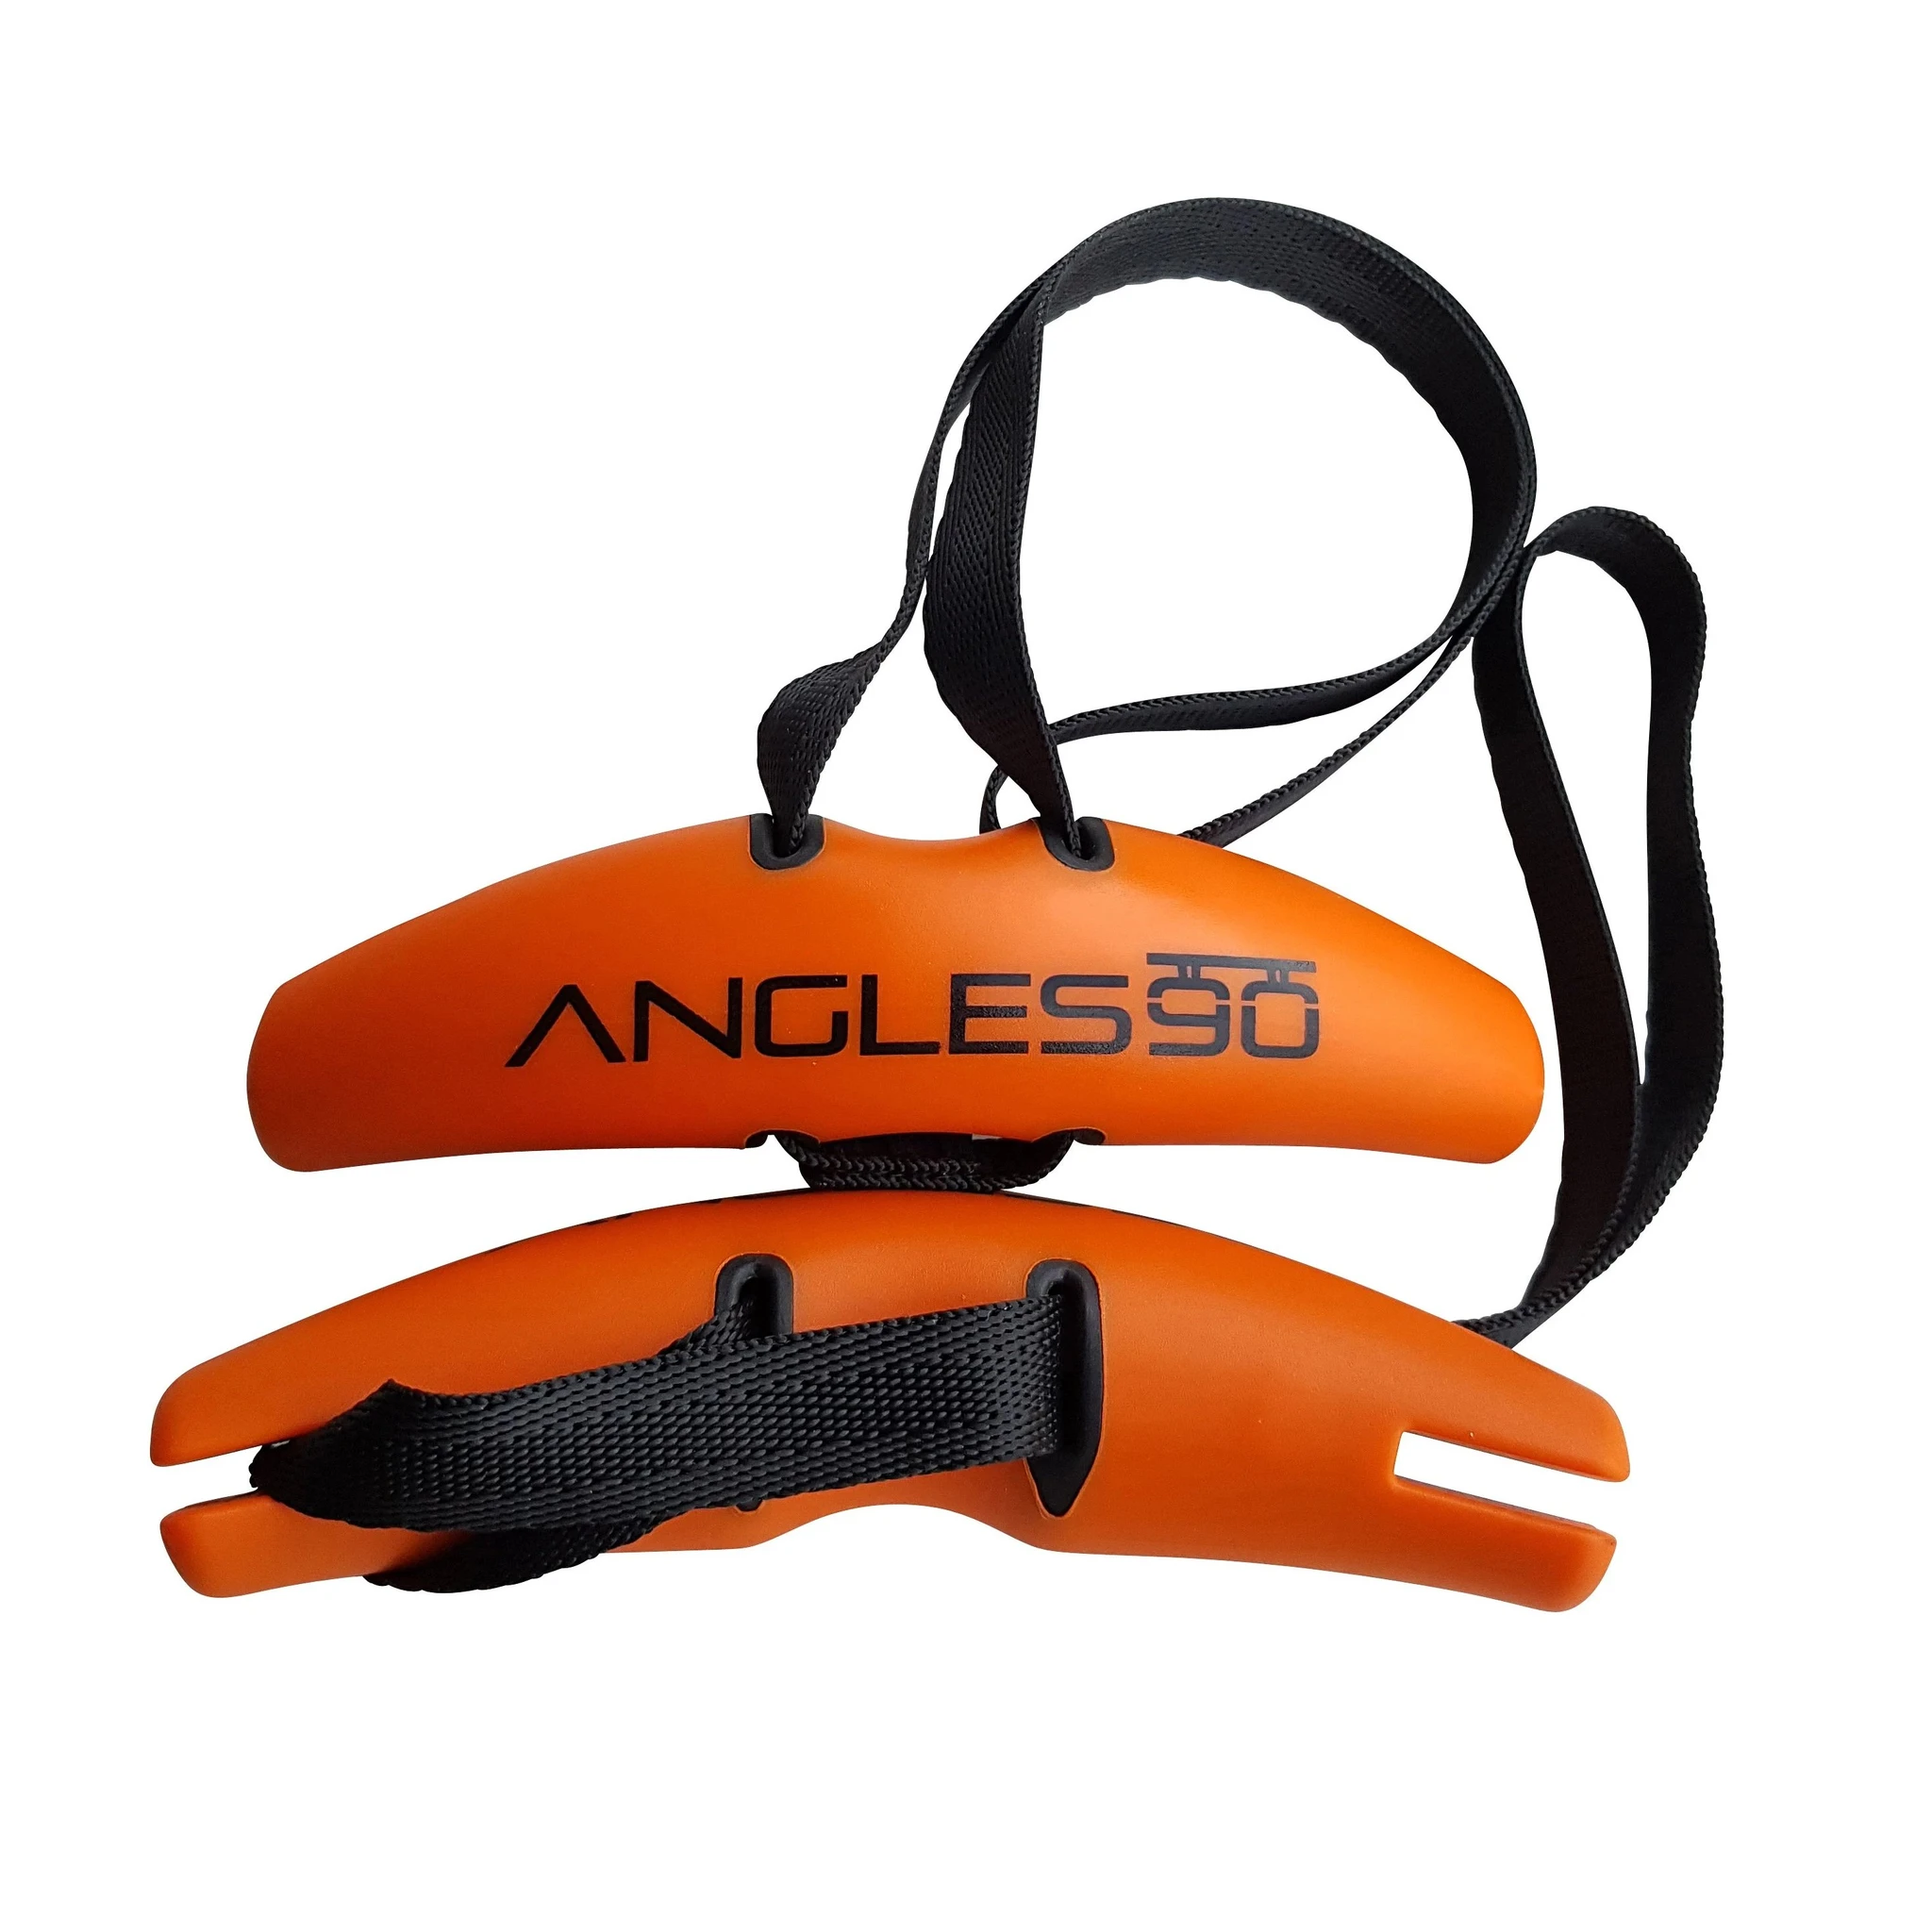 Angles90 (2 grips + 2 straps)